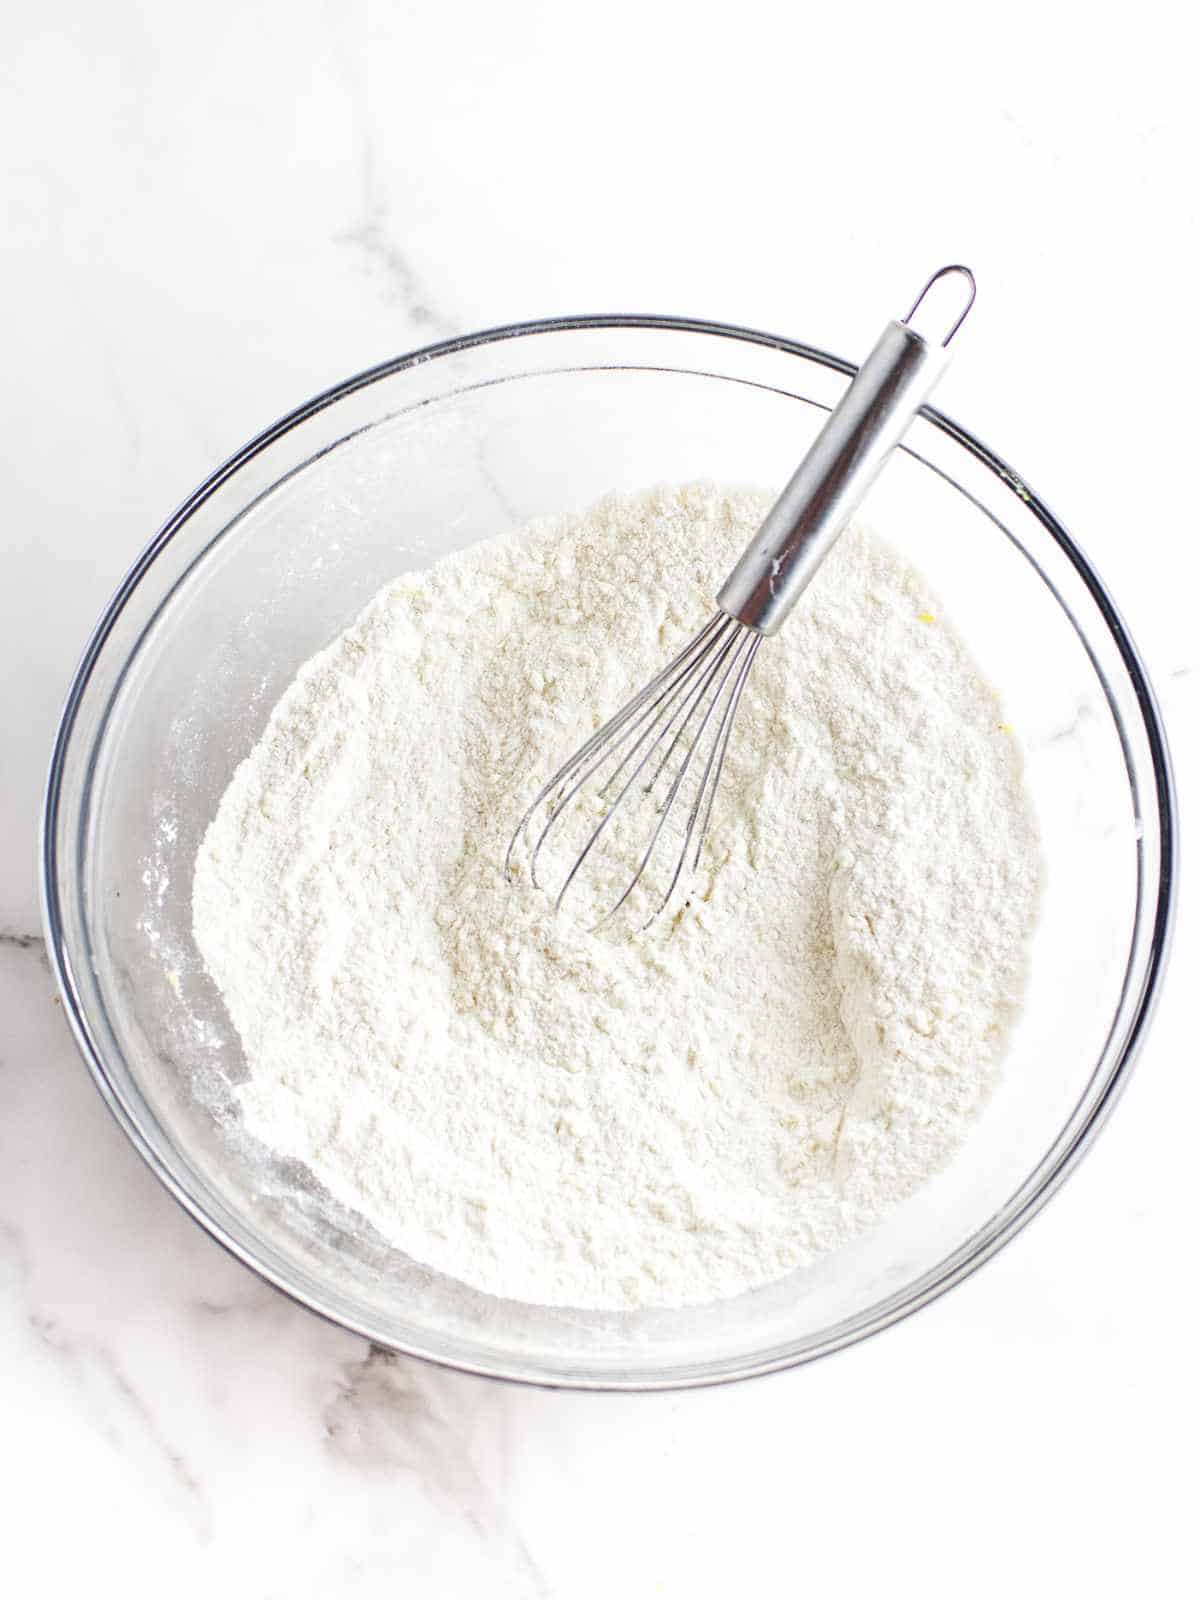 dry ingredients in a bowl with a whisk on a white marble background.